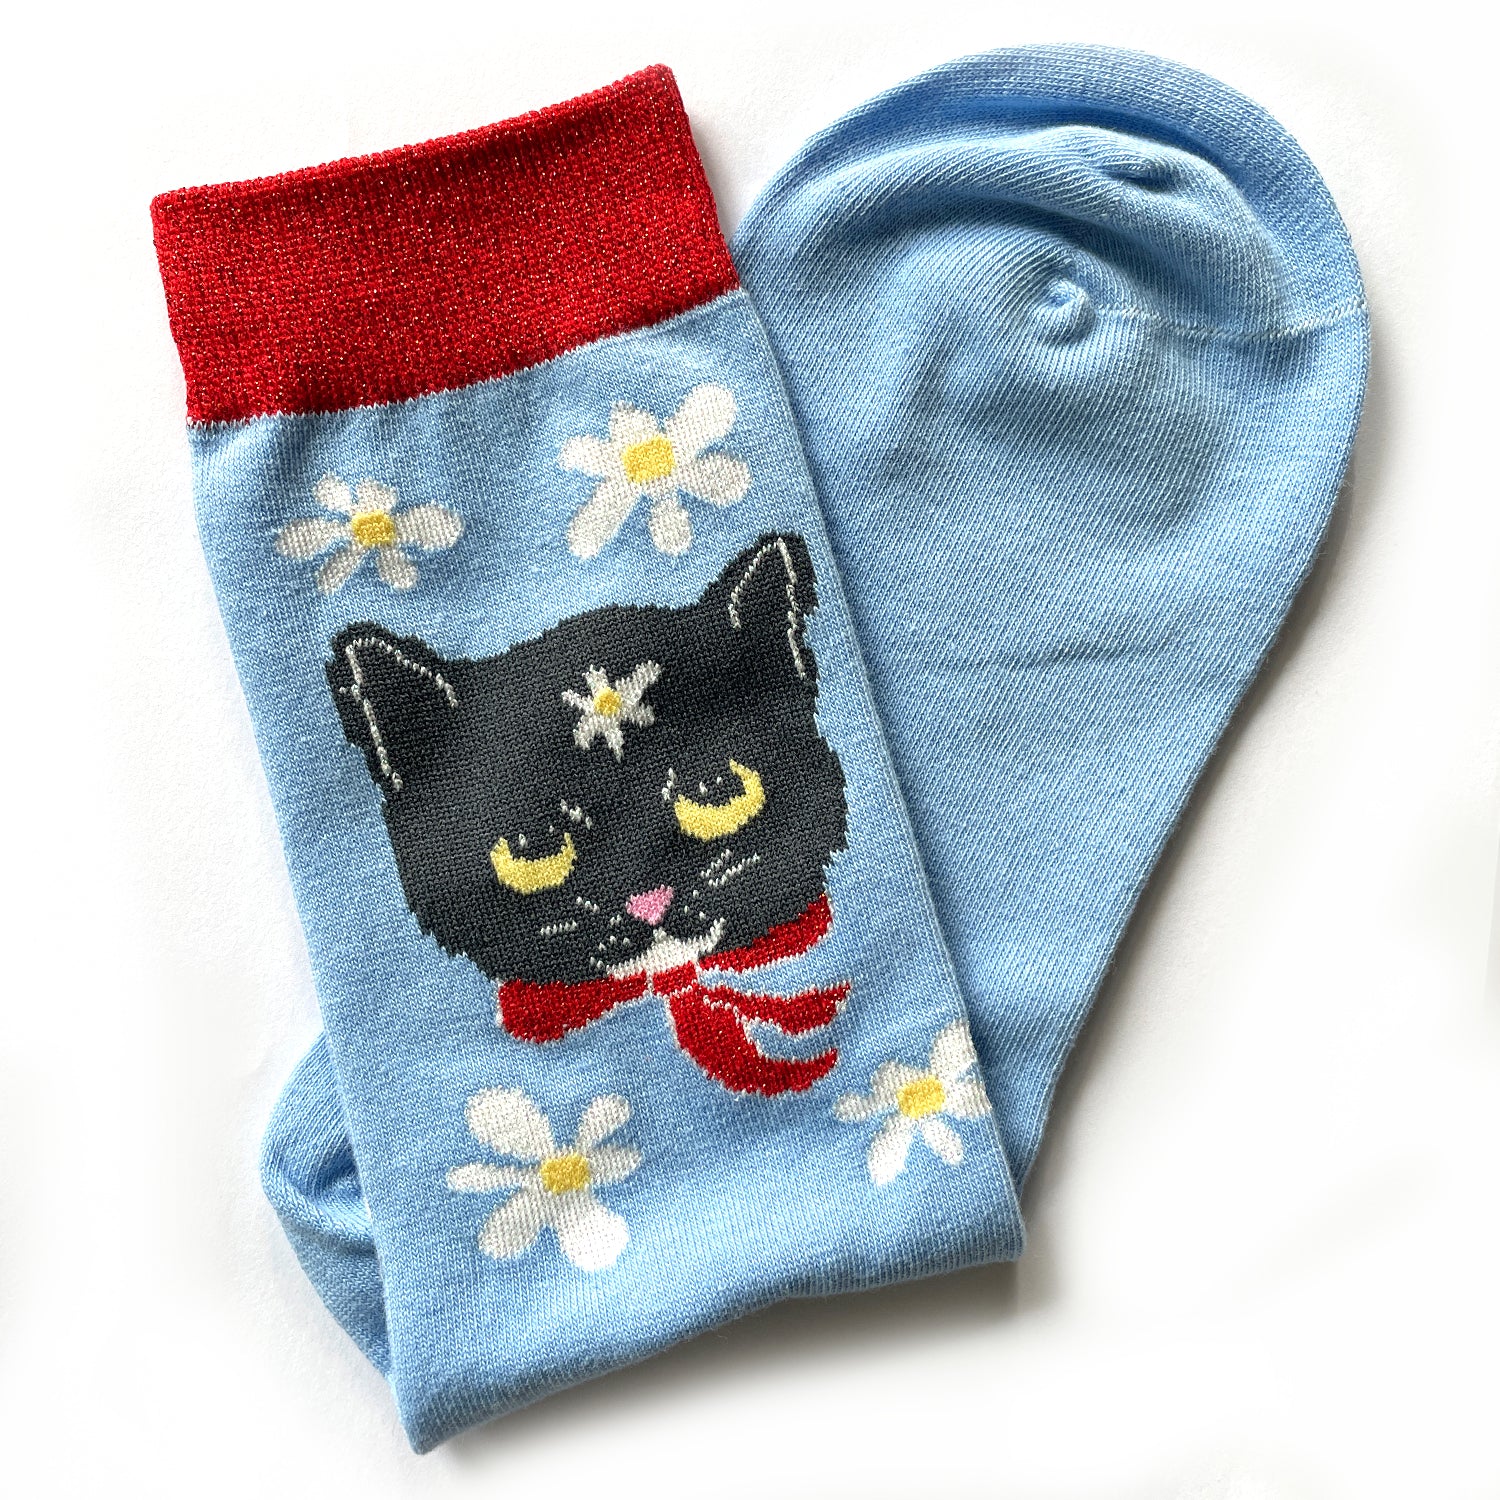 Red and blue sock with white daisies and black cat.